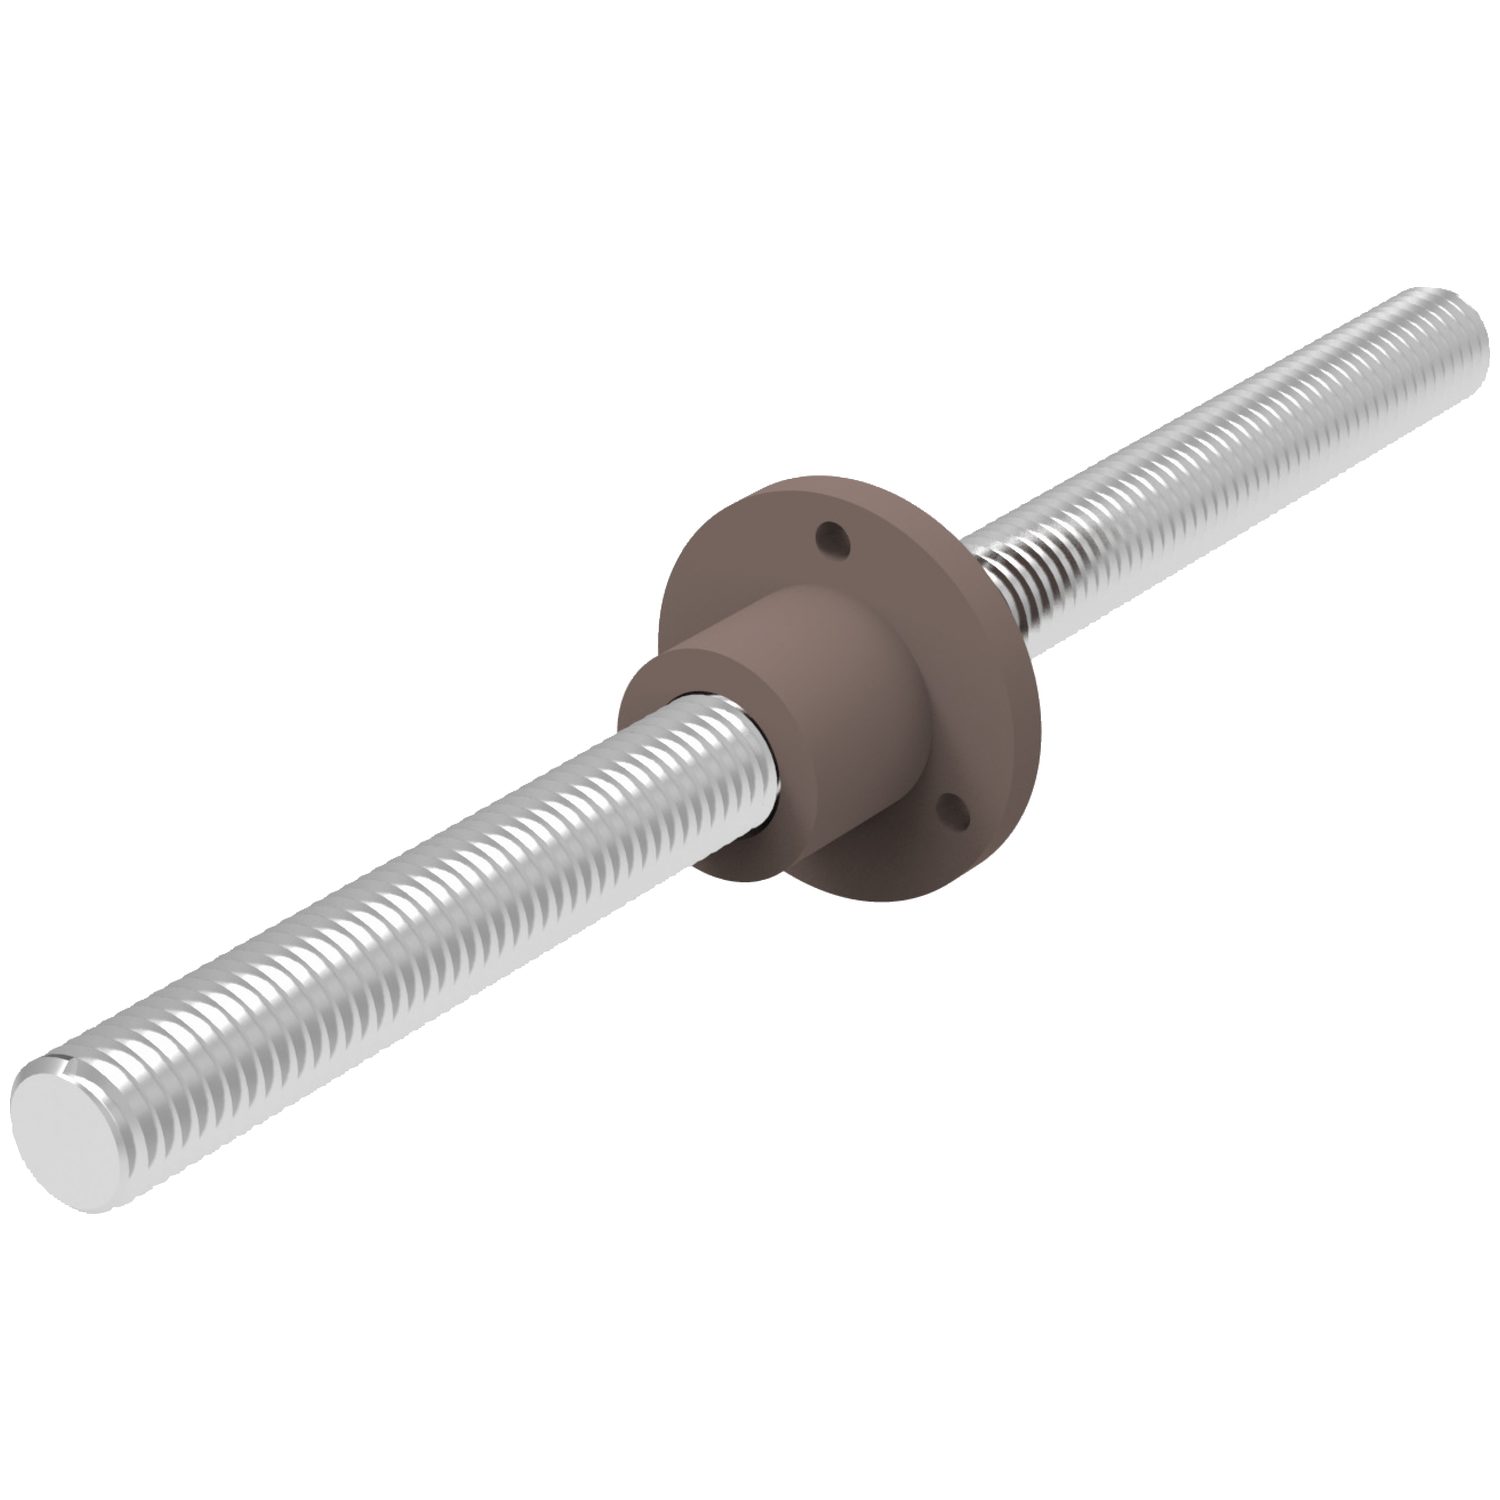 Anti-backlash High Helix Lead Screws Anodized aluminium or 416 stainless steel screw with round acetal resin nut. High precision. Nut fitted to screw to ensure anti-backlash.